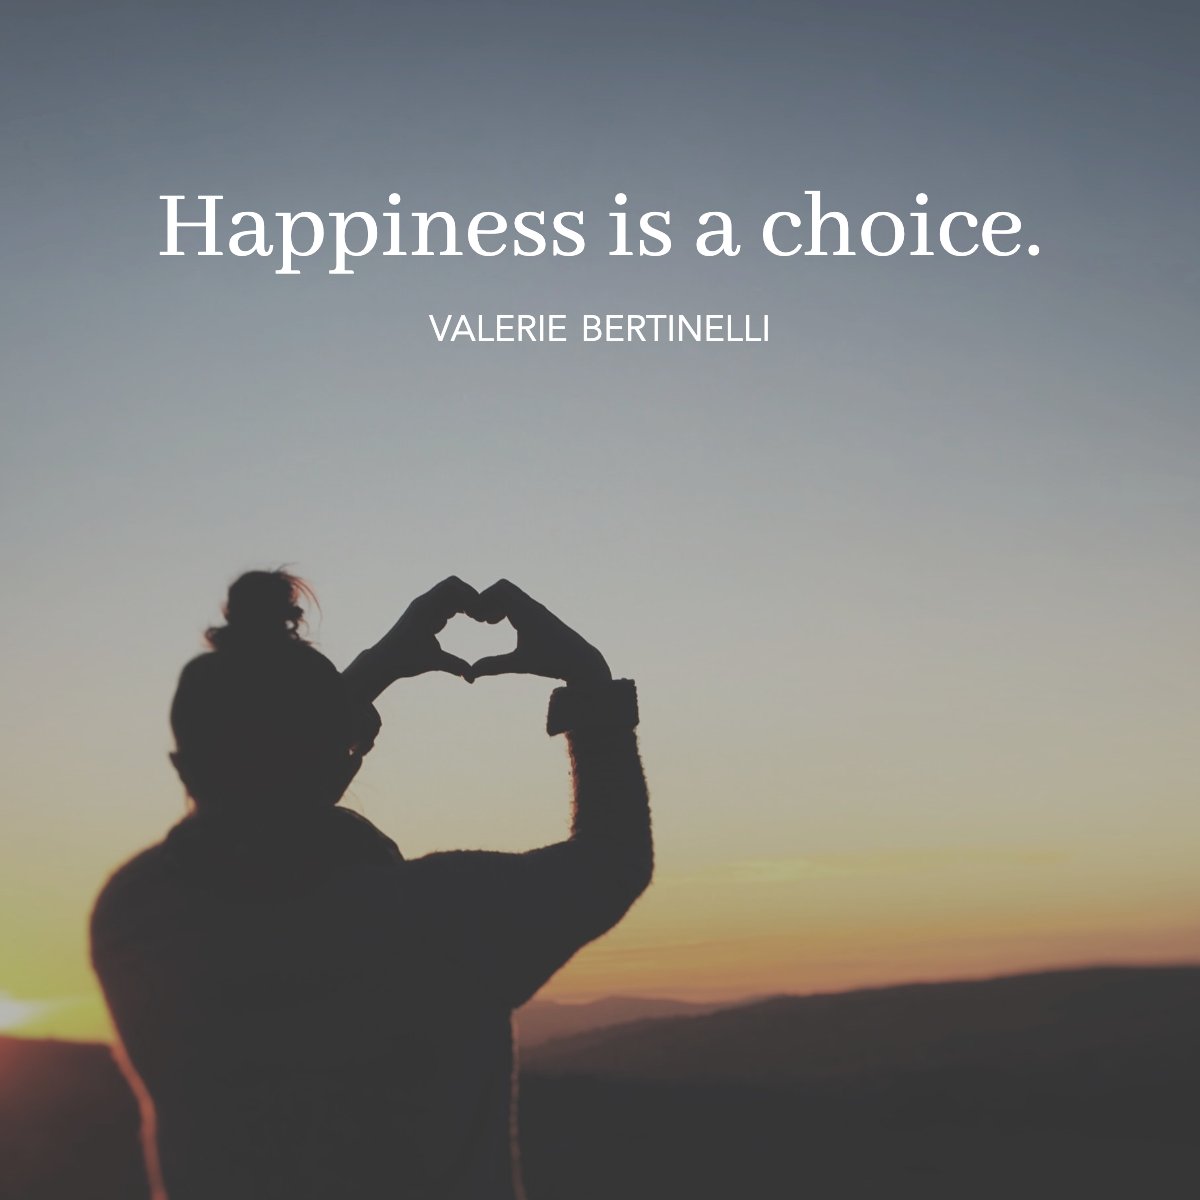 'Happiness is a choice. You can choose to be happy. There's going to be stress in life, but it's your choice whether you let it affect you or not.'  
― Valerie Bertinelli 🤗

#lifeisajourney   #happinesss   #choosehappy   #instaquote   #wisdom   #wisdomquote